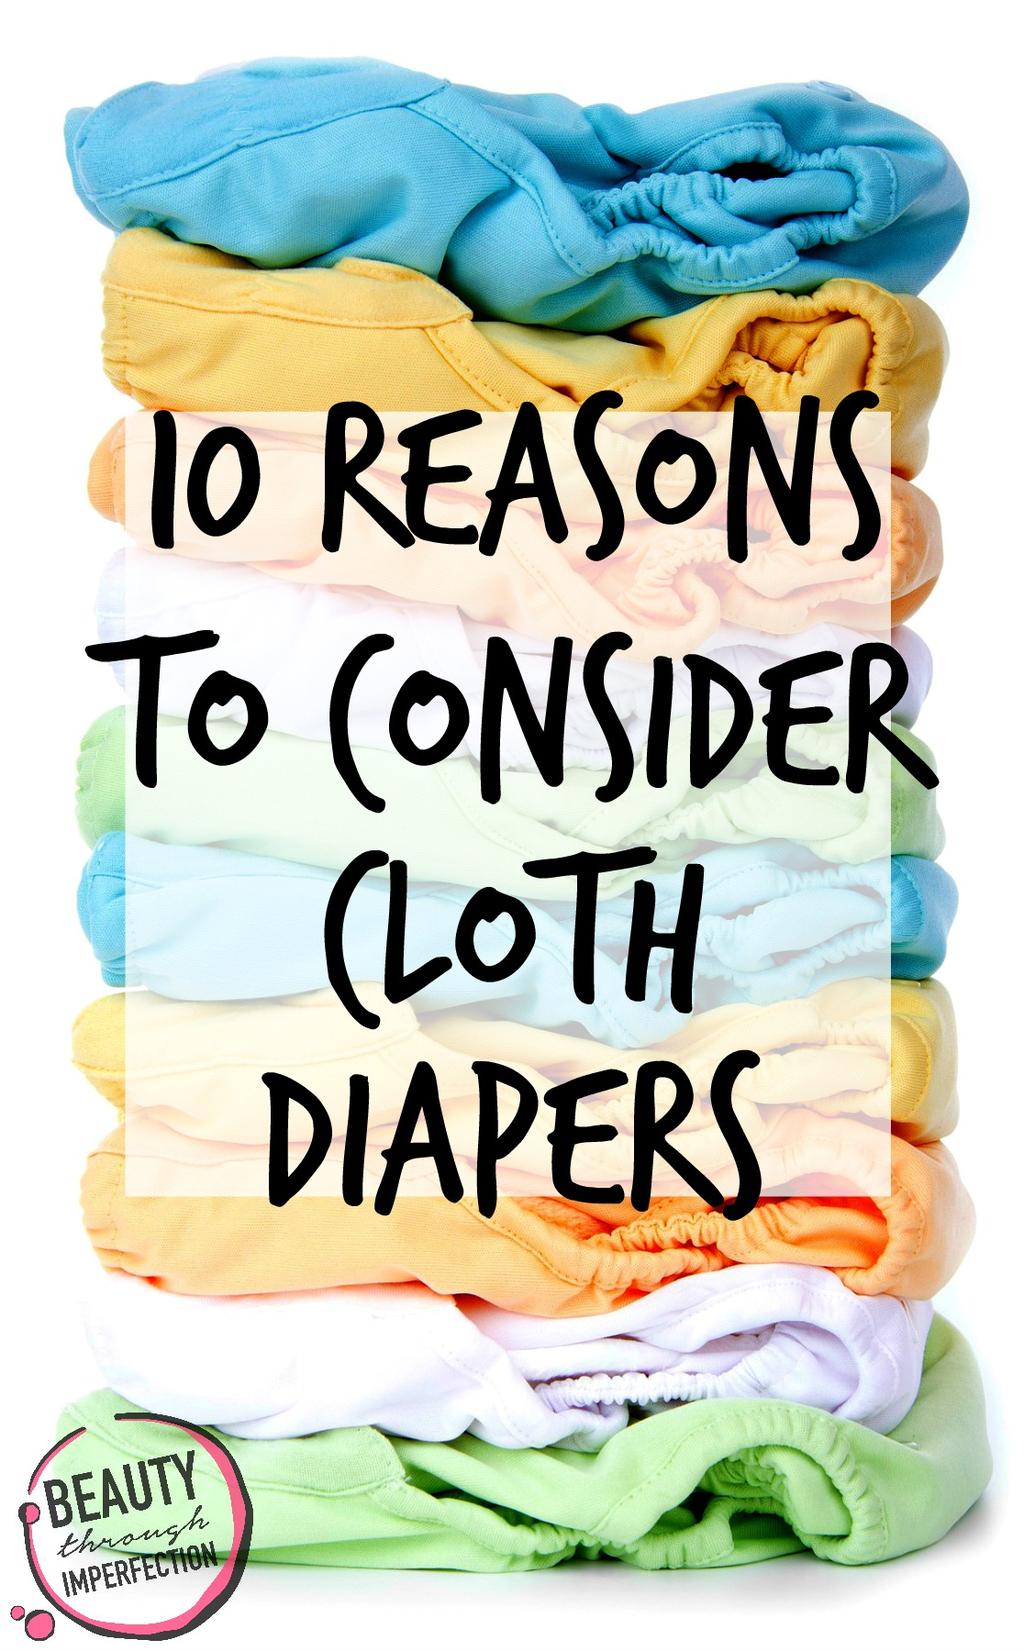 10 reasons to consider cloth diapers